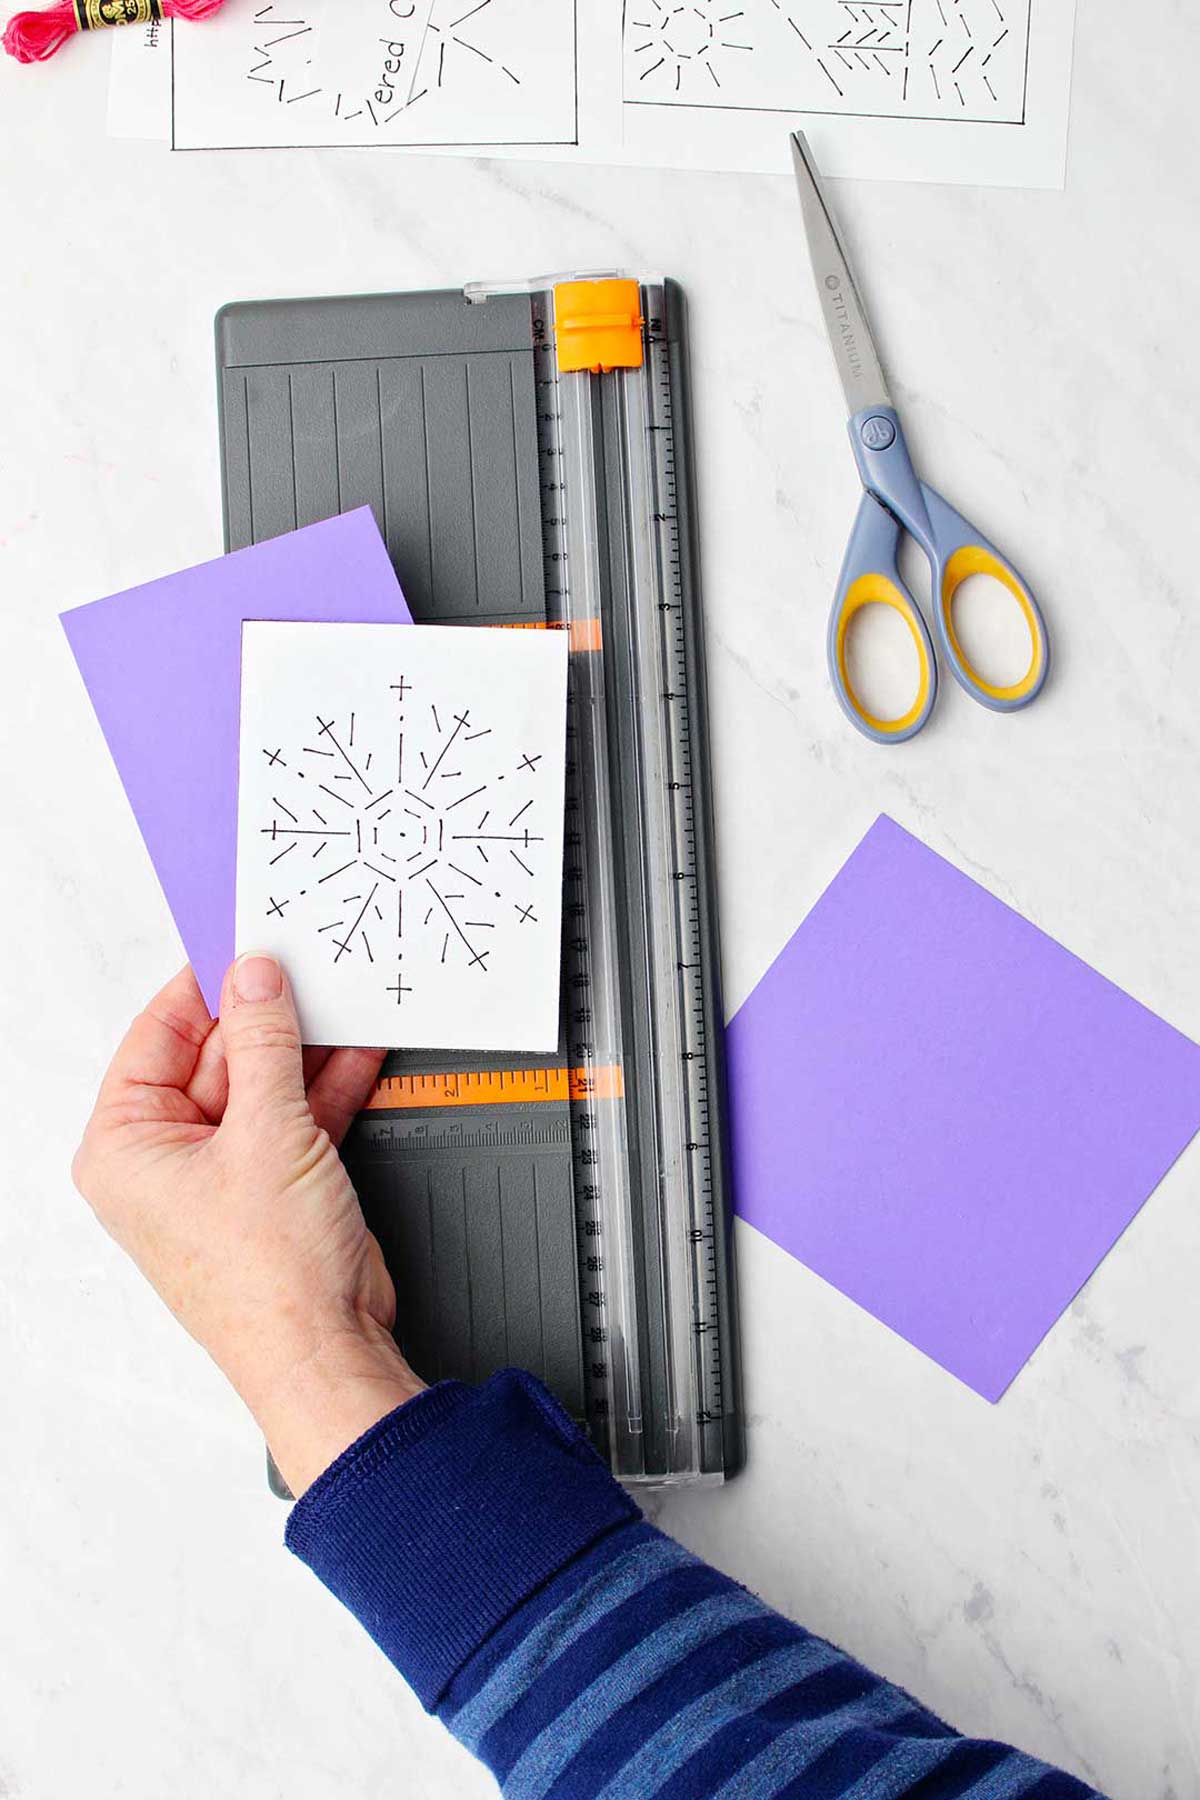 A hand holding card and snowflake template resting on a paper cutter.